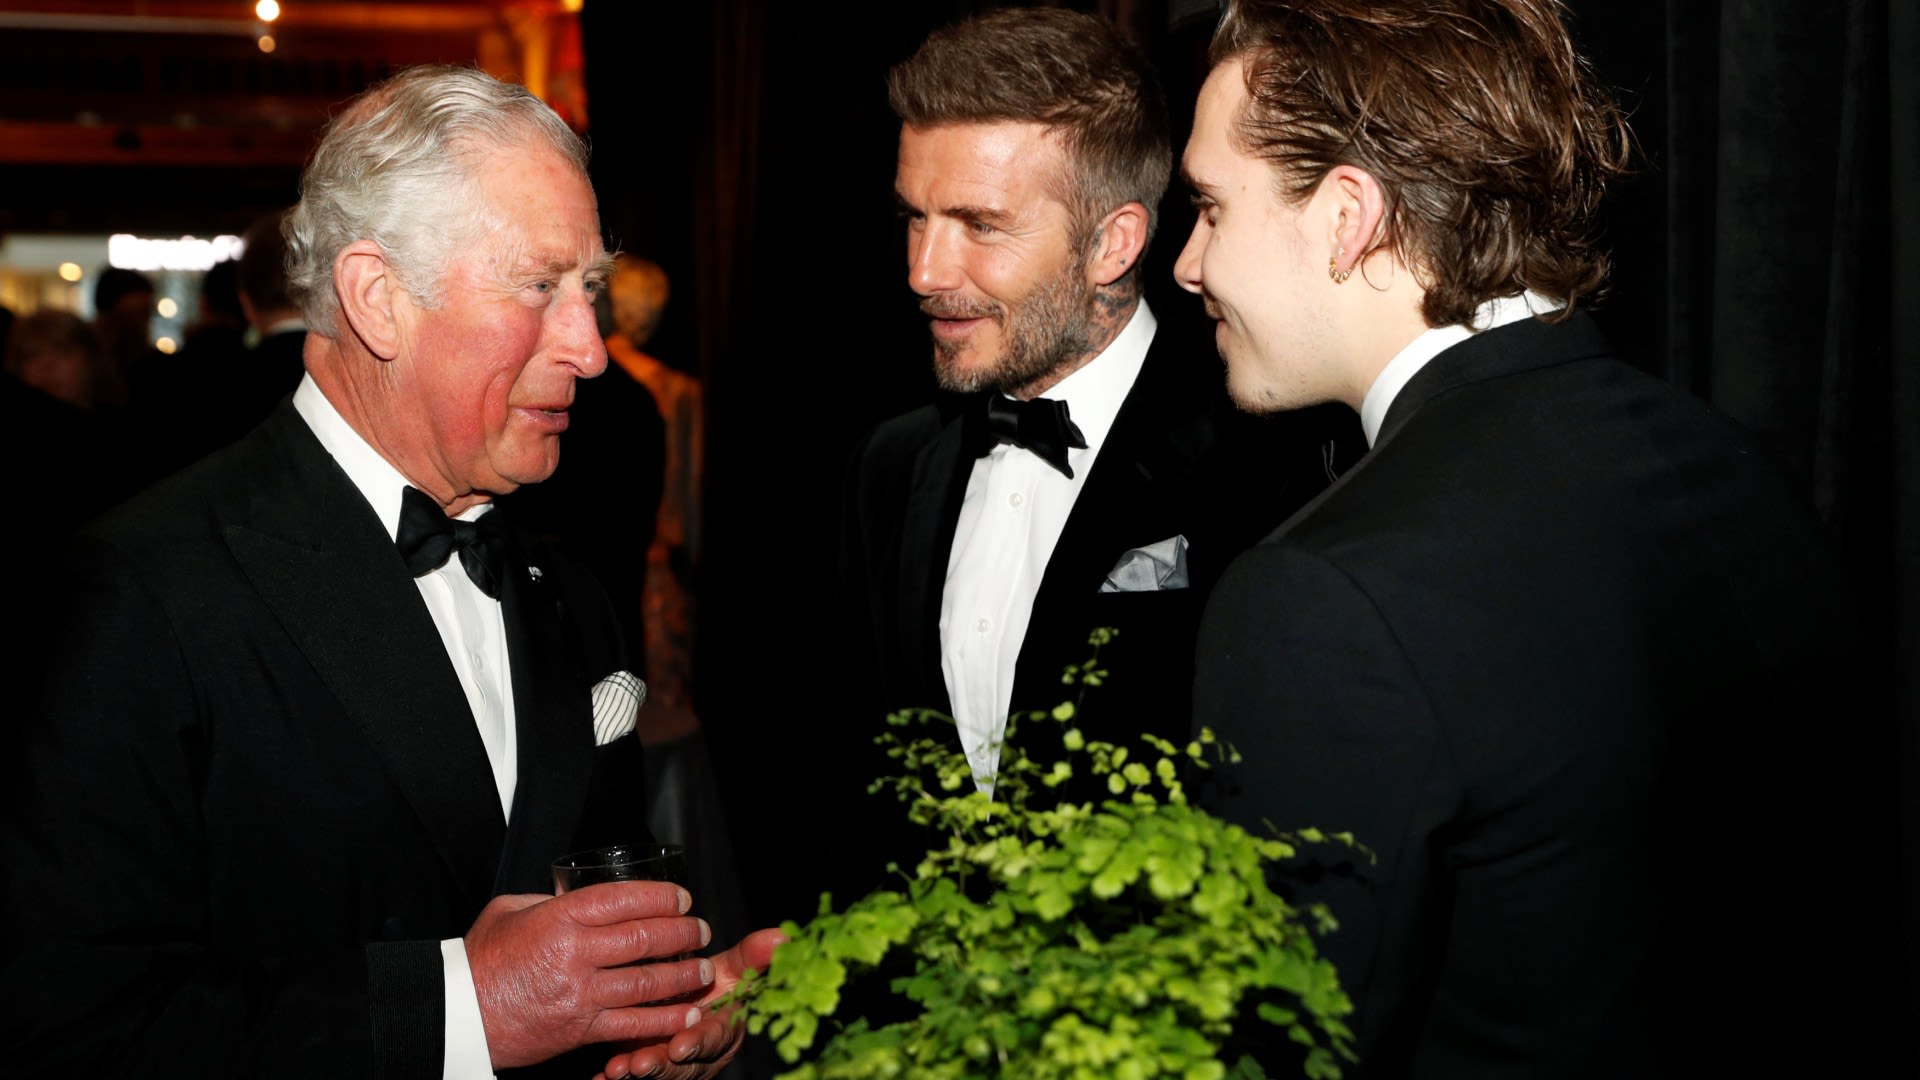 David Beckham netted King Charles meeting after pair bonded over shared hobby